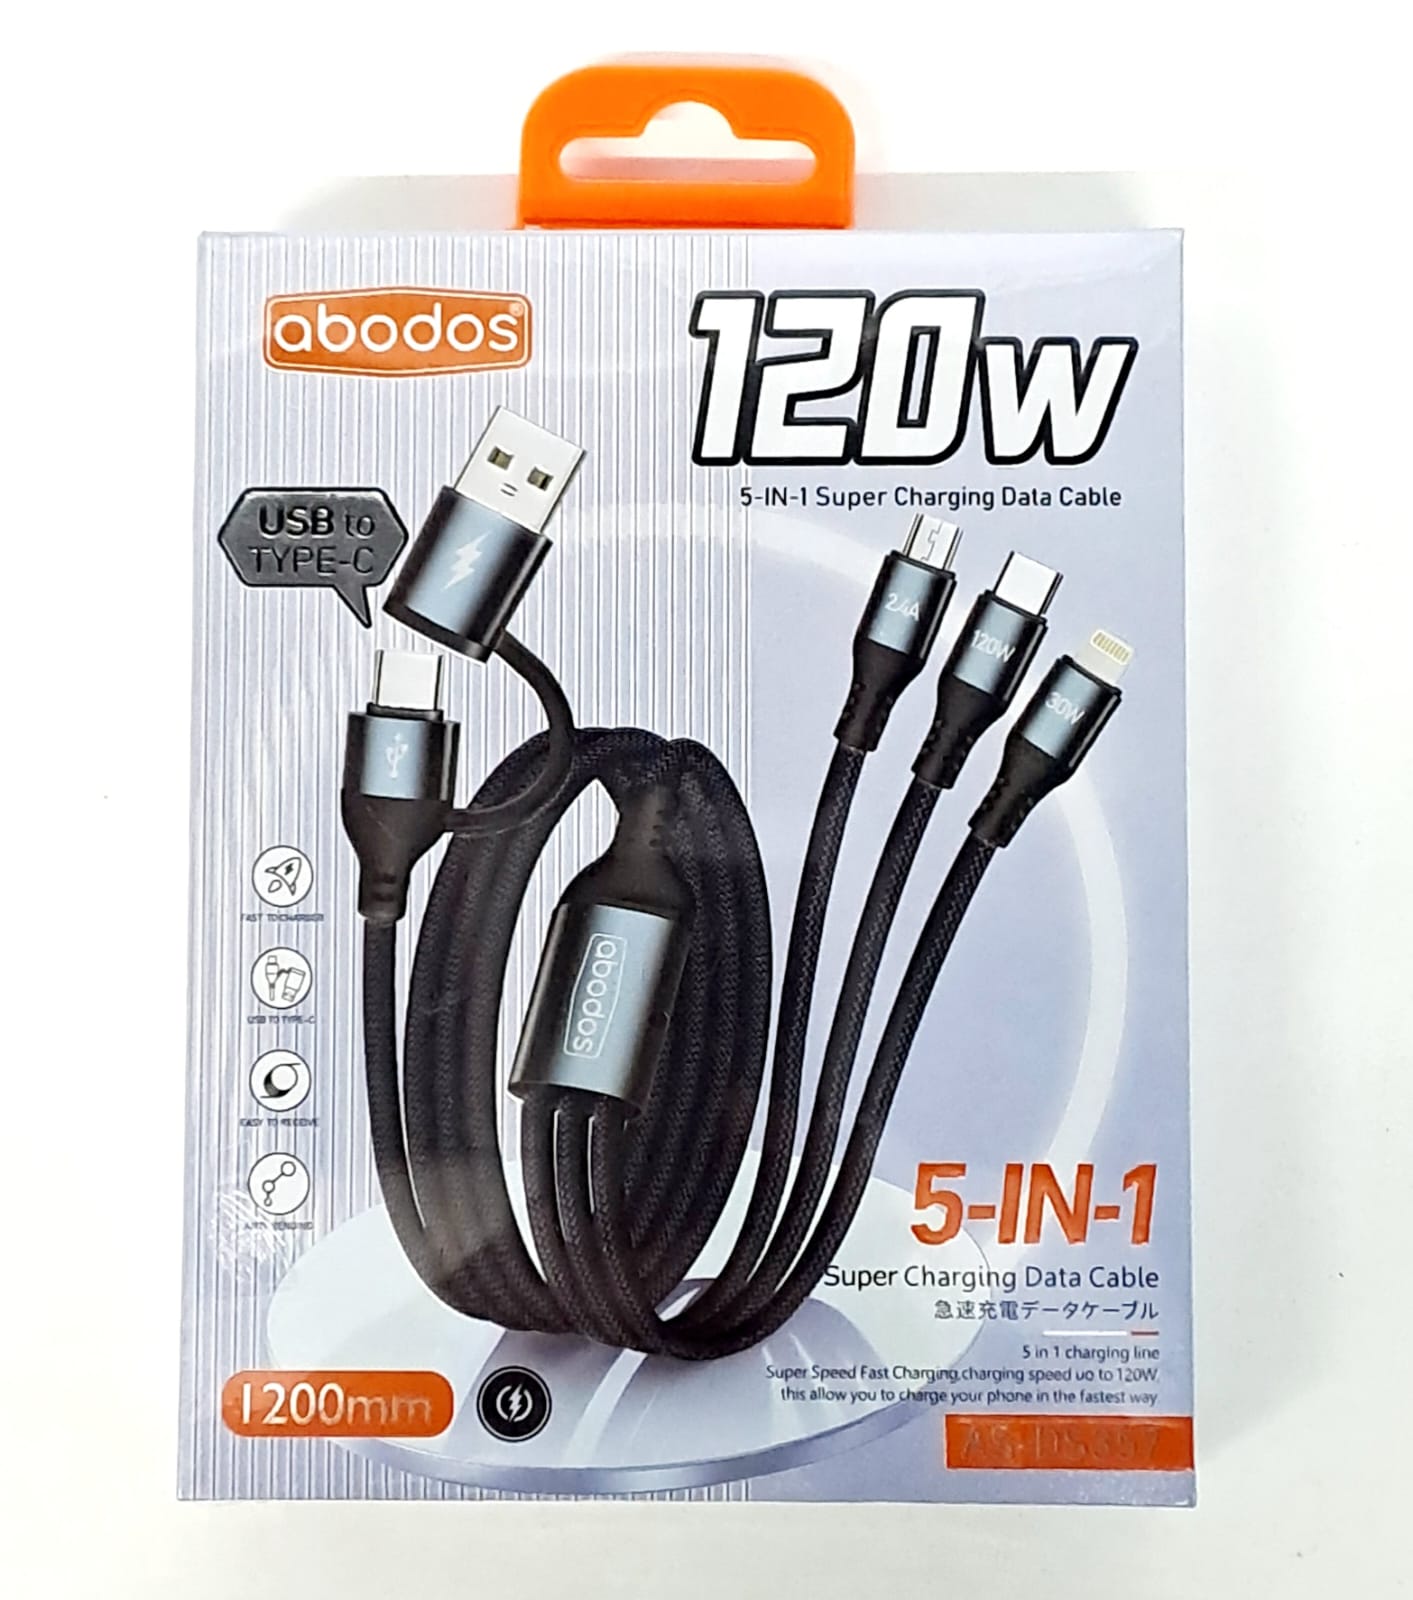 AS-DS357 abodos 120W Super Charging 5 in 1 Data Cable 1.2m